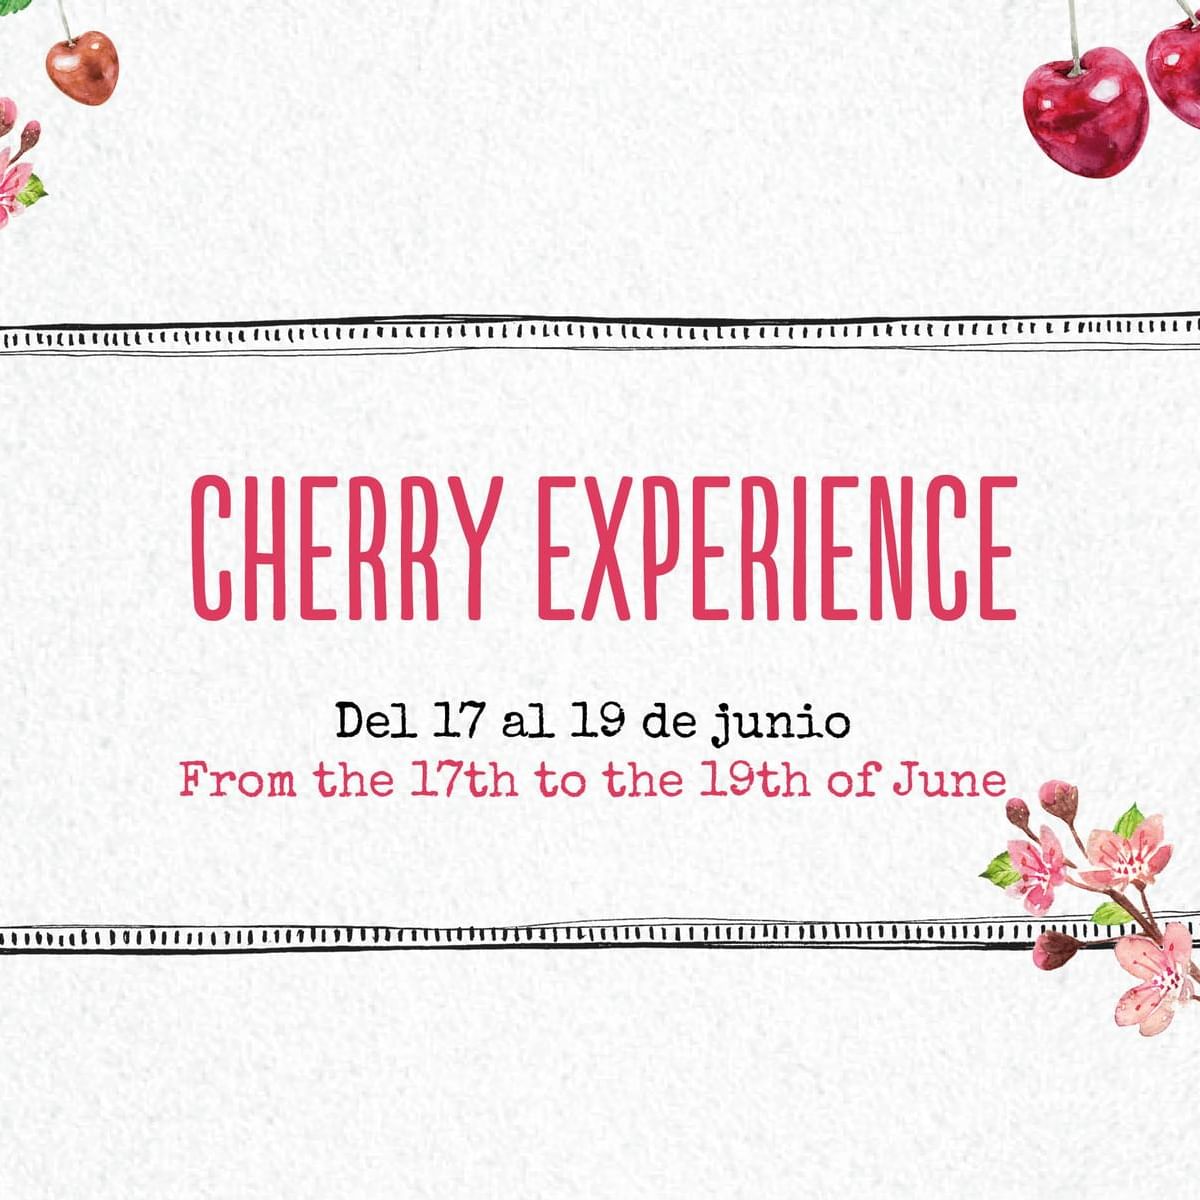 cherry experience at the Marbella Club